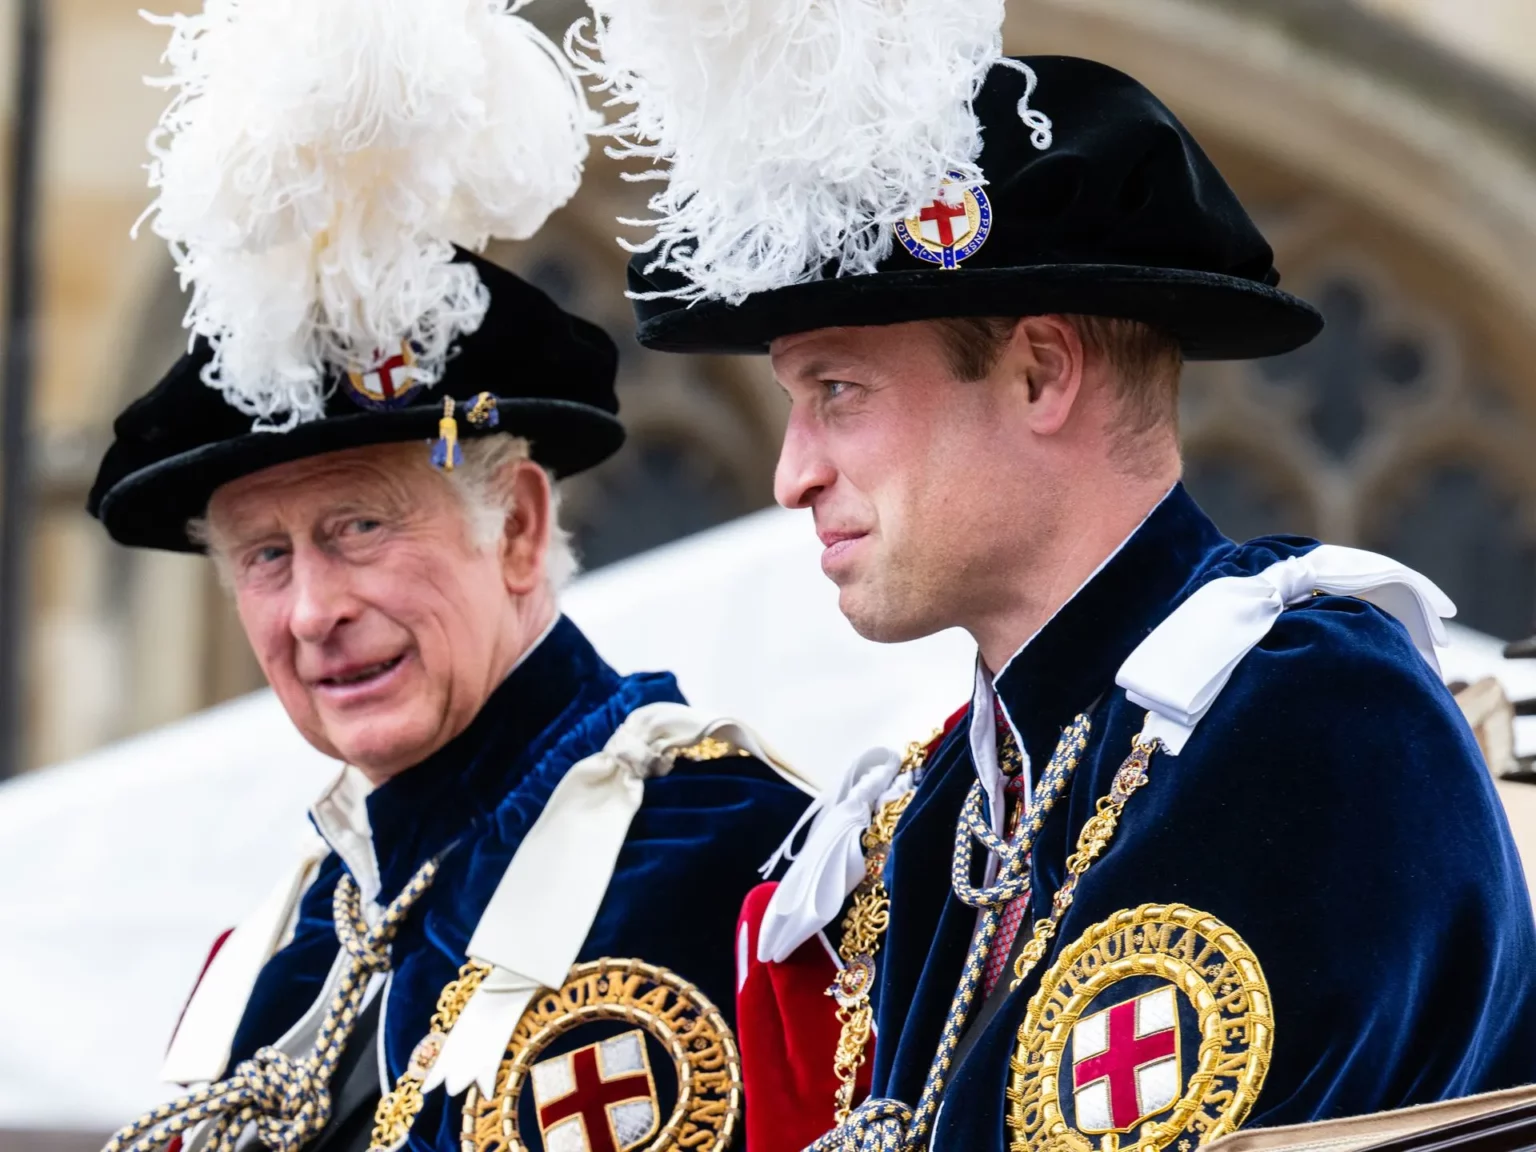 prince-william-to-pay-homage-to-king-charles-iii-at-coronation-ceremony